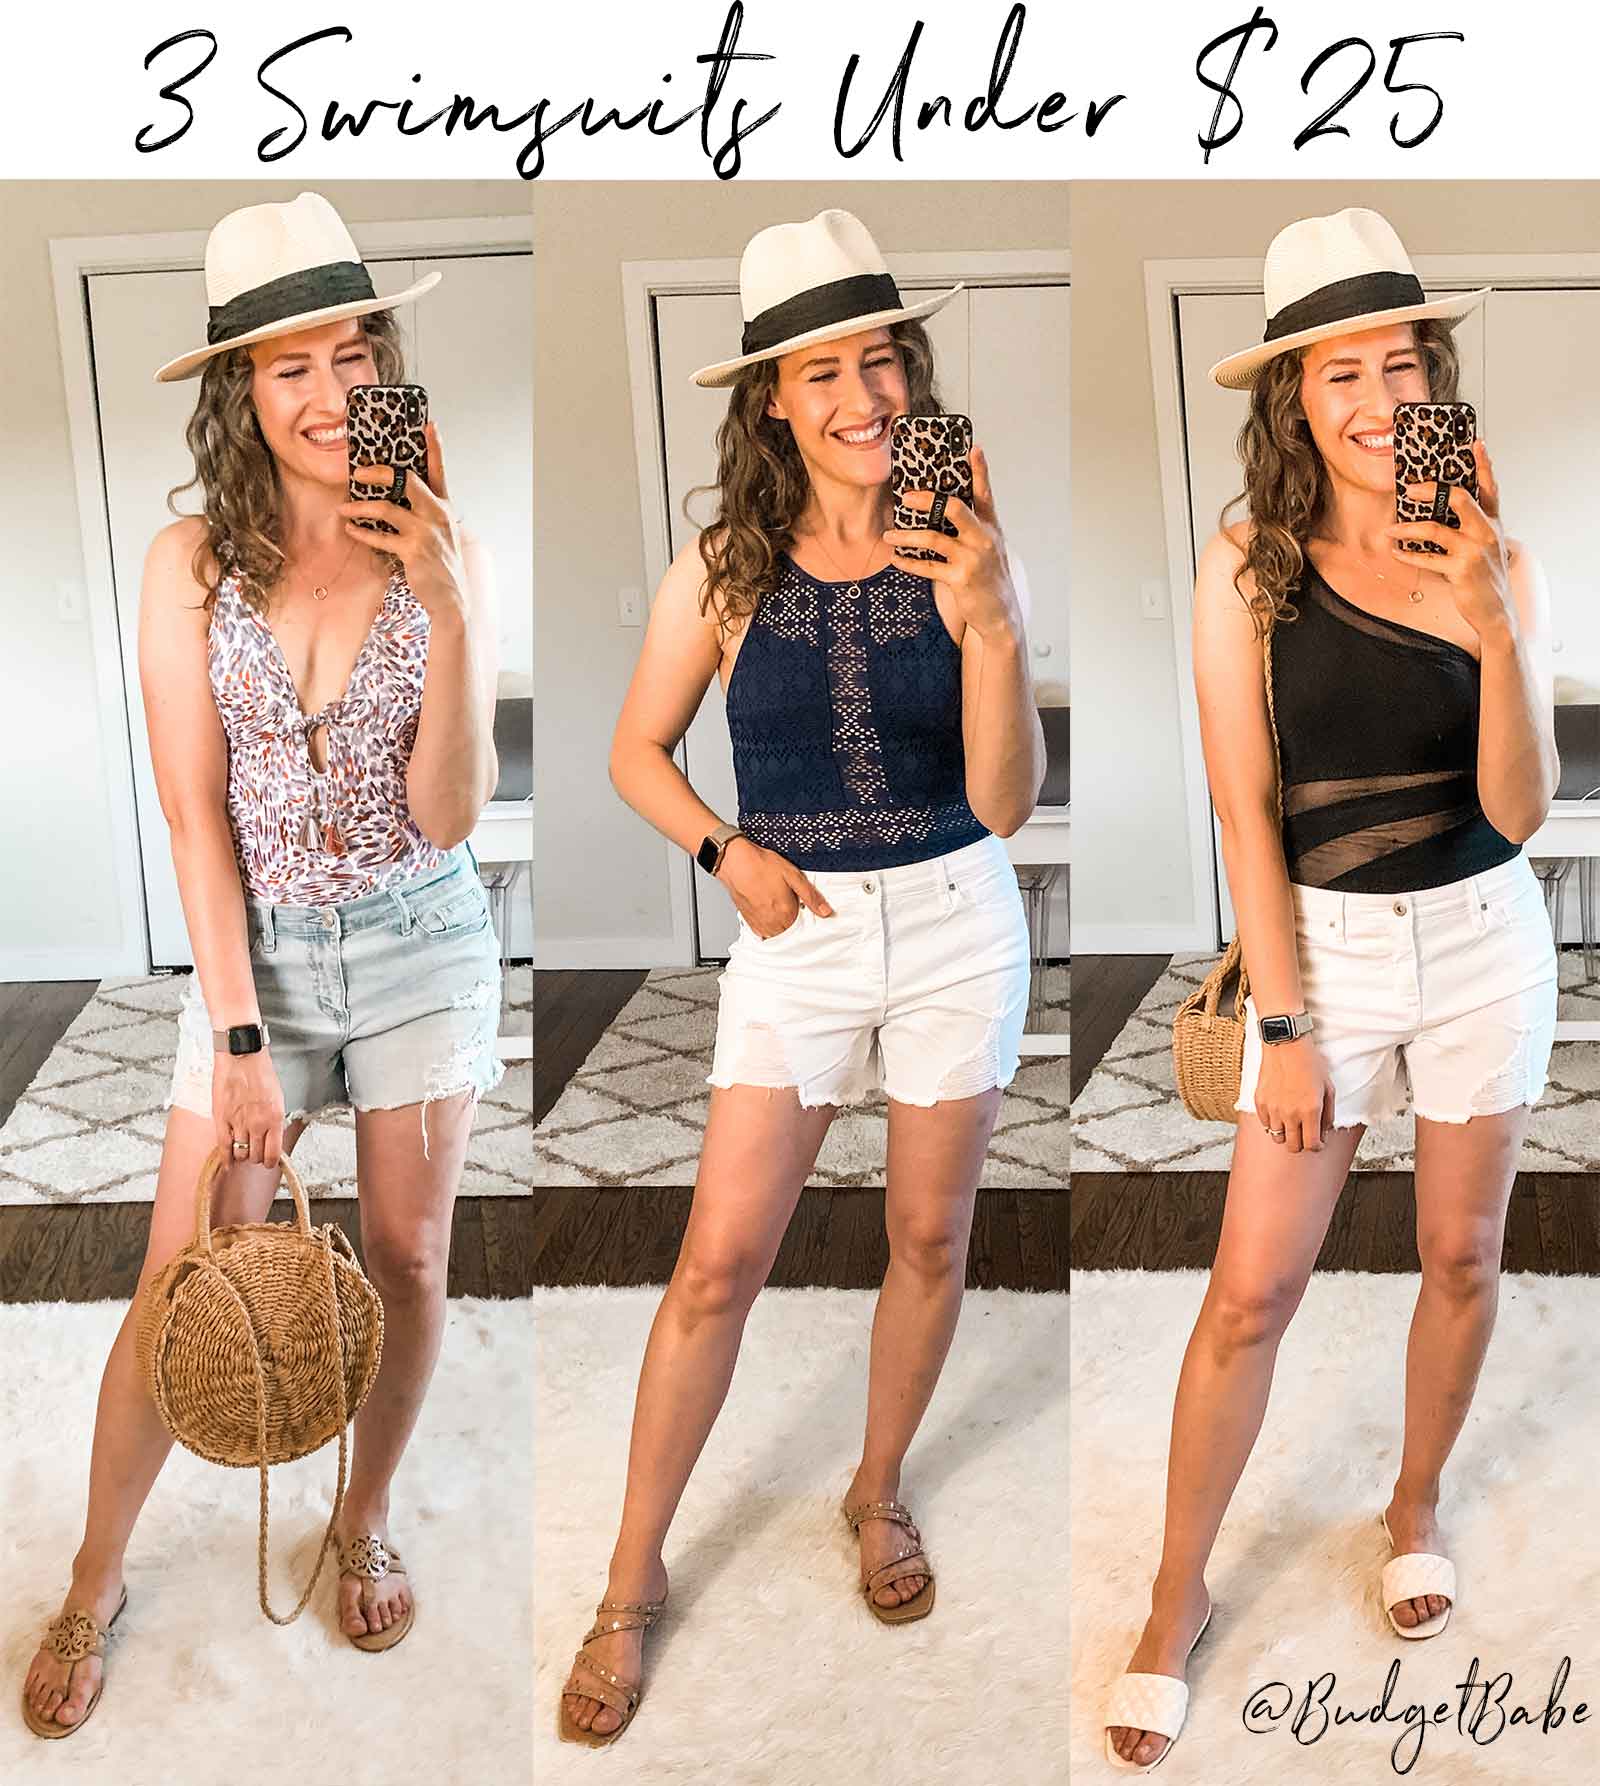 One piece bathing suits swimsuits under $25 at Walmart | The Budget Babe affordable style blog